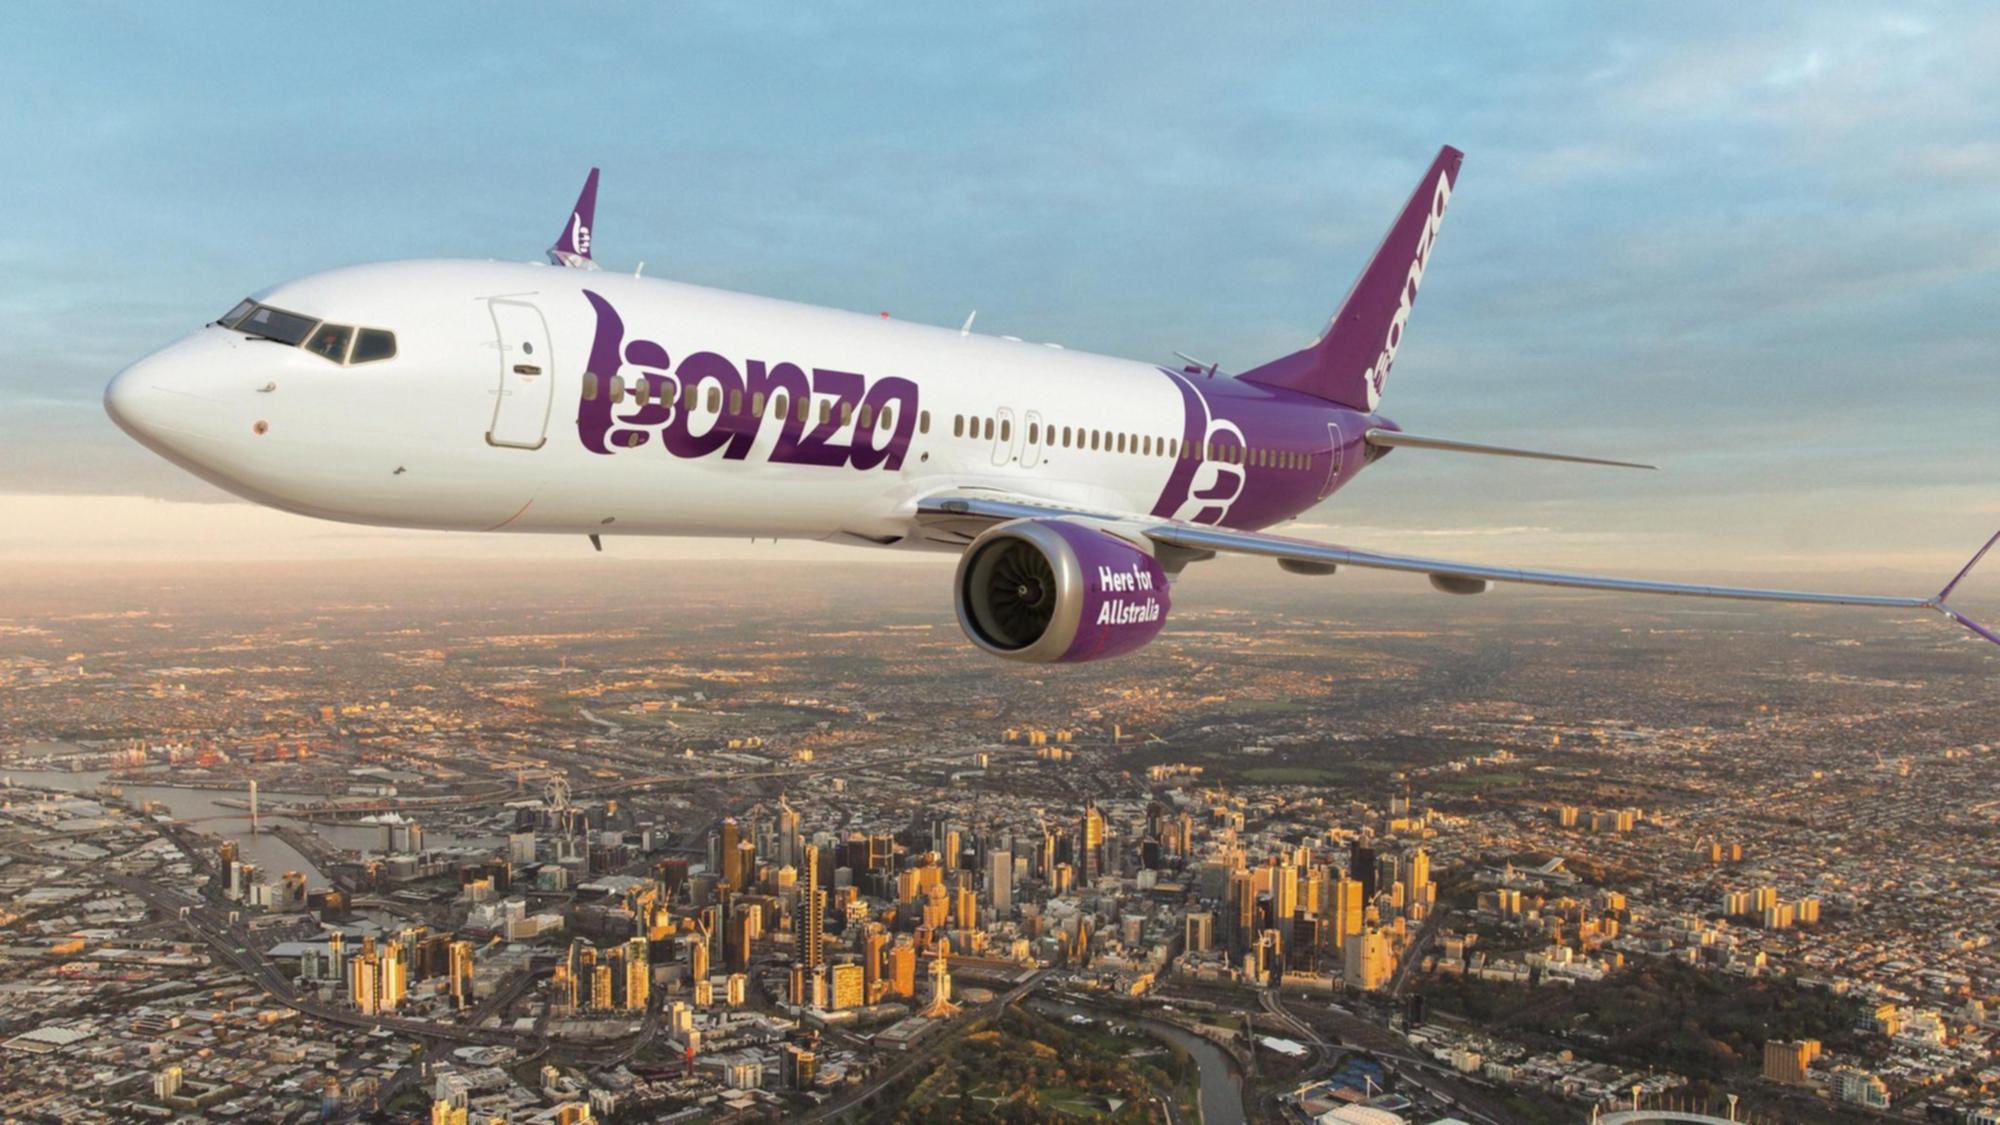 Bonza enters voluntary administration after cancelling all flights